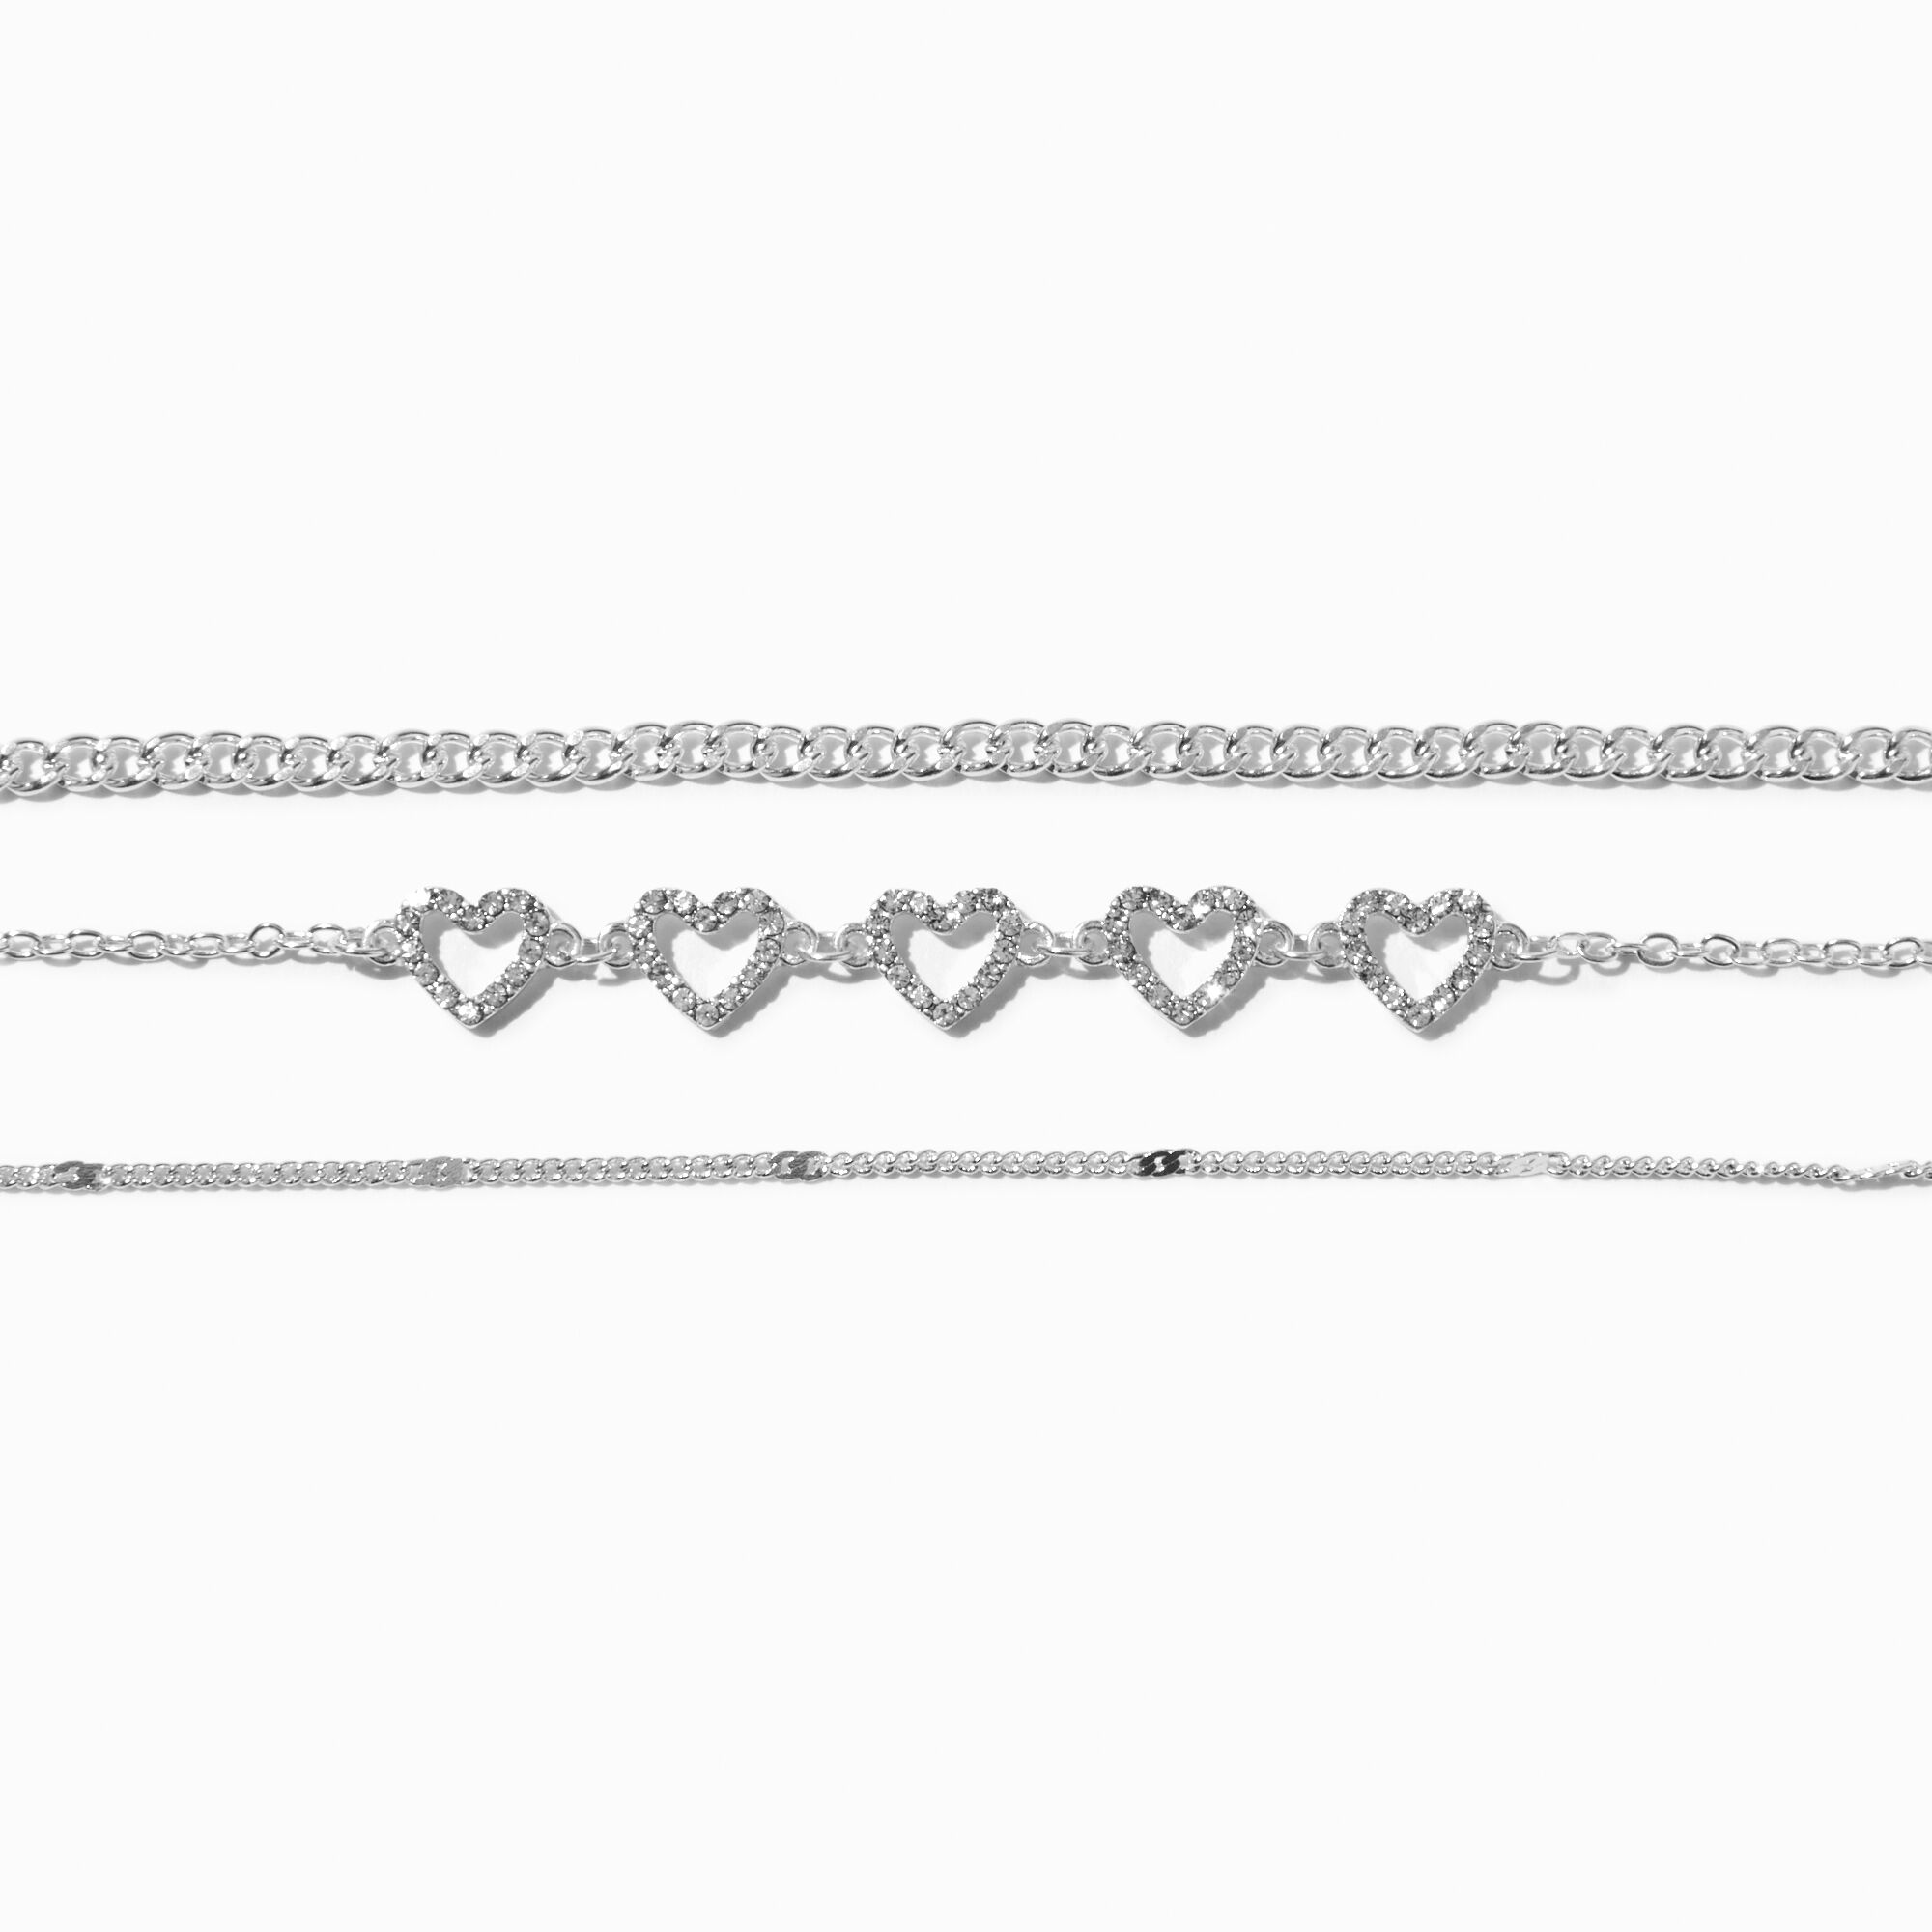 View Claires Tone Crystal Heart Choker Necklaces 3 Pack Silver information